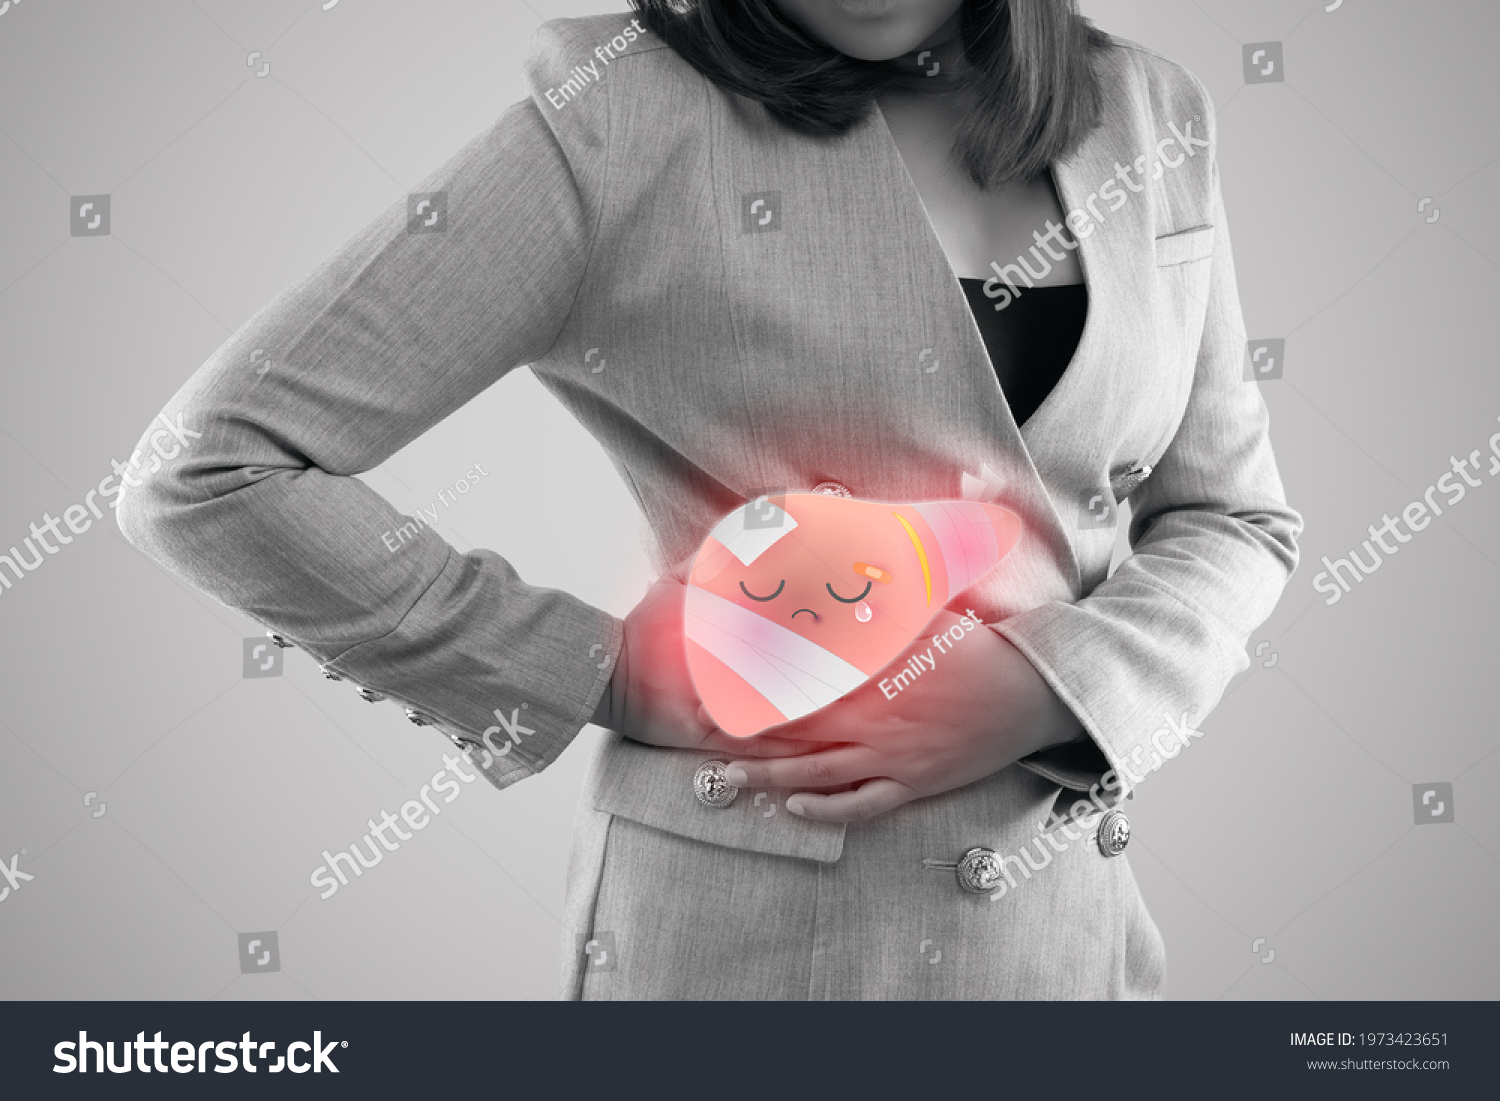 Illustration sick liver on woman's body against gray background, Hepatitis, Concept with healthcare and medicine #1973423651